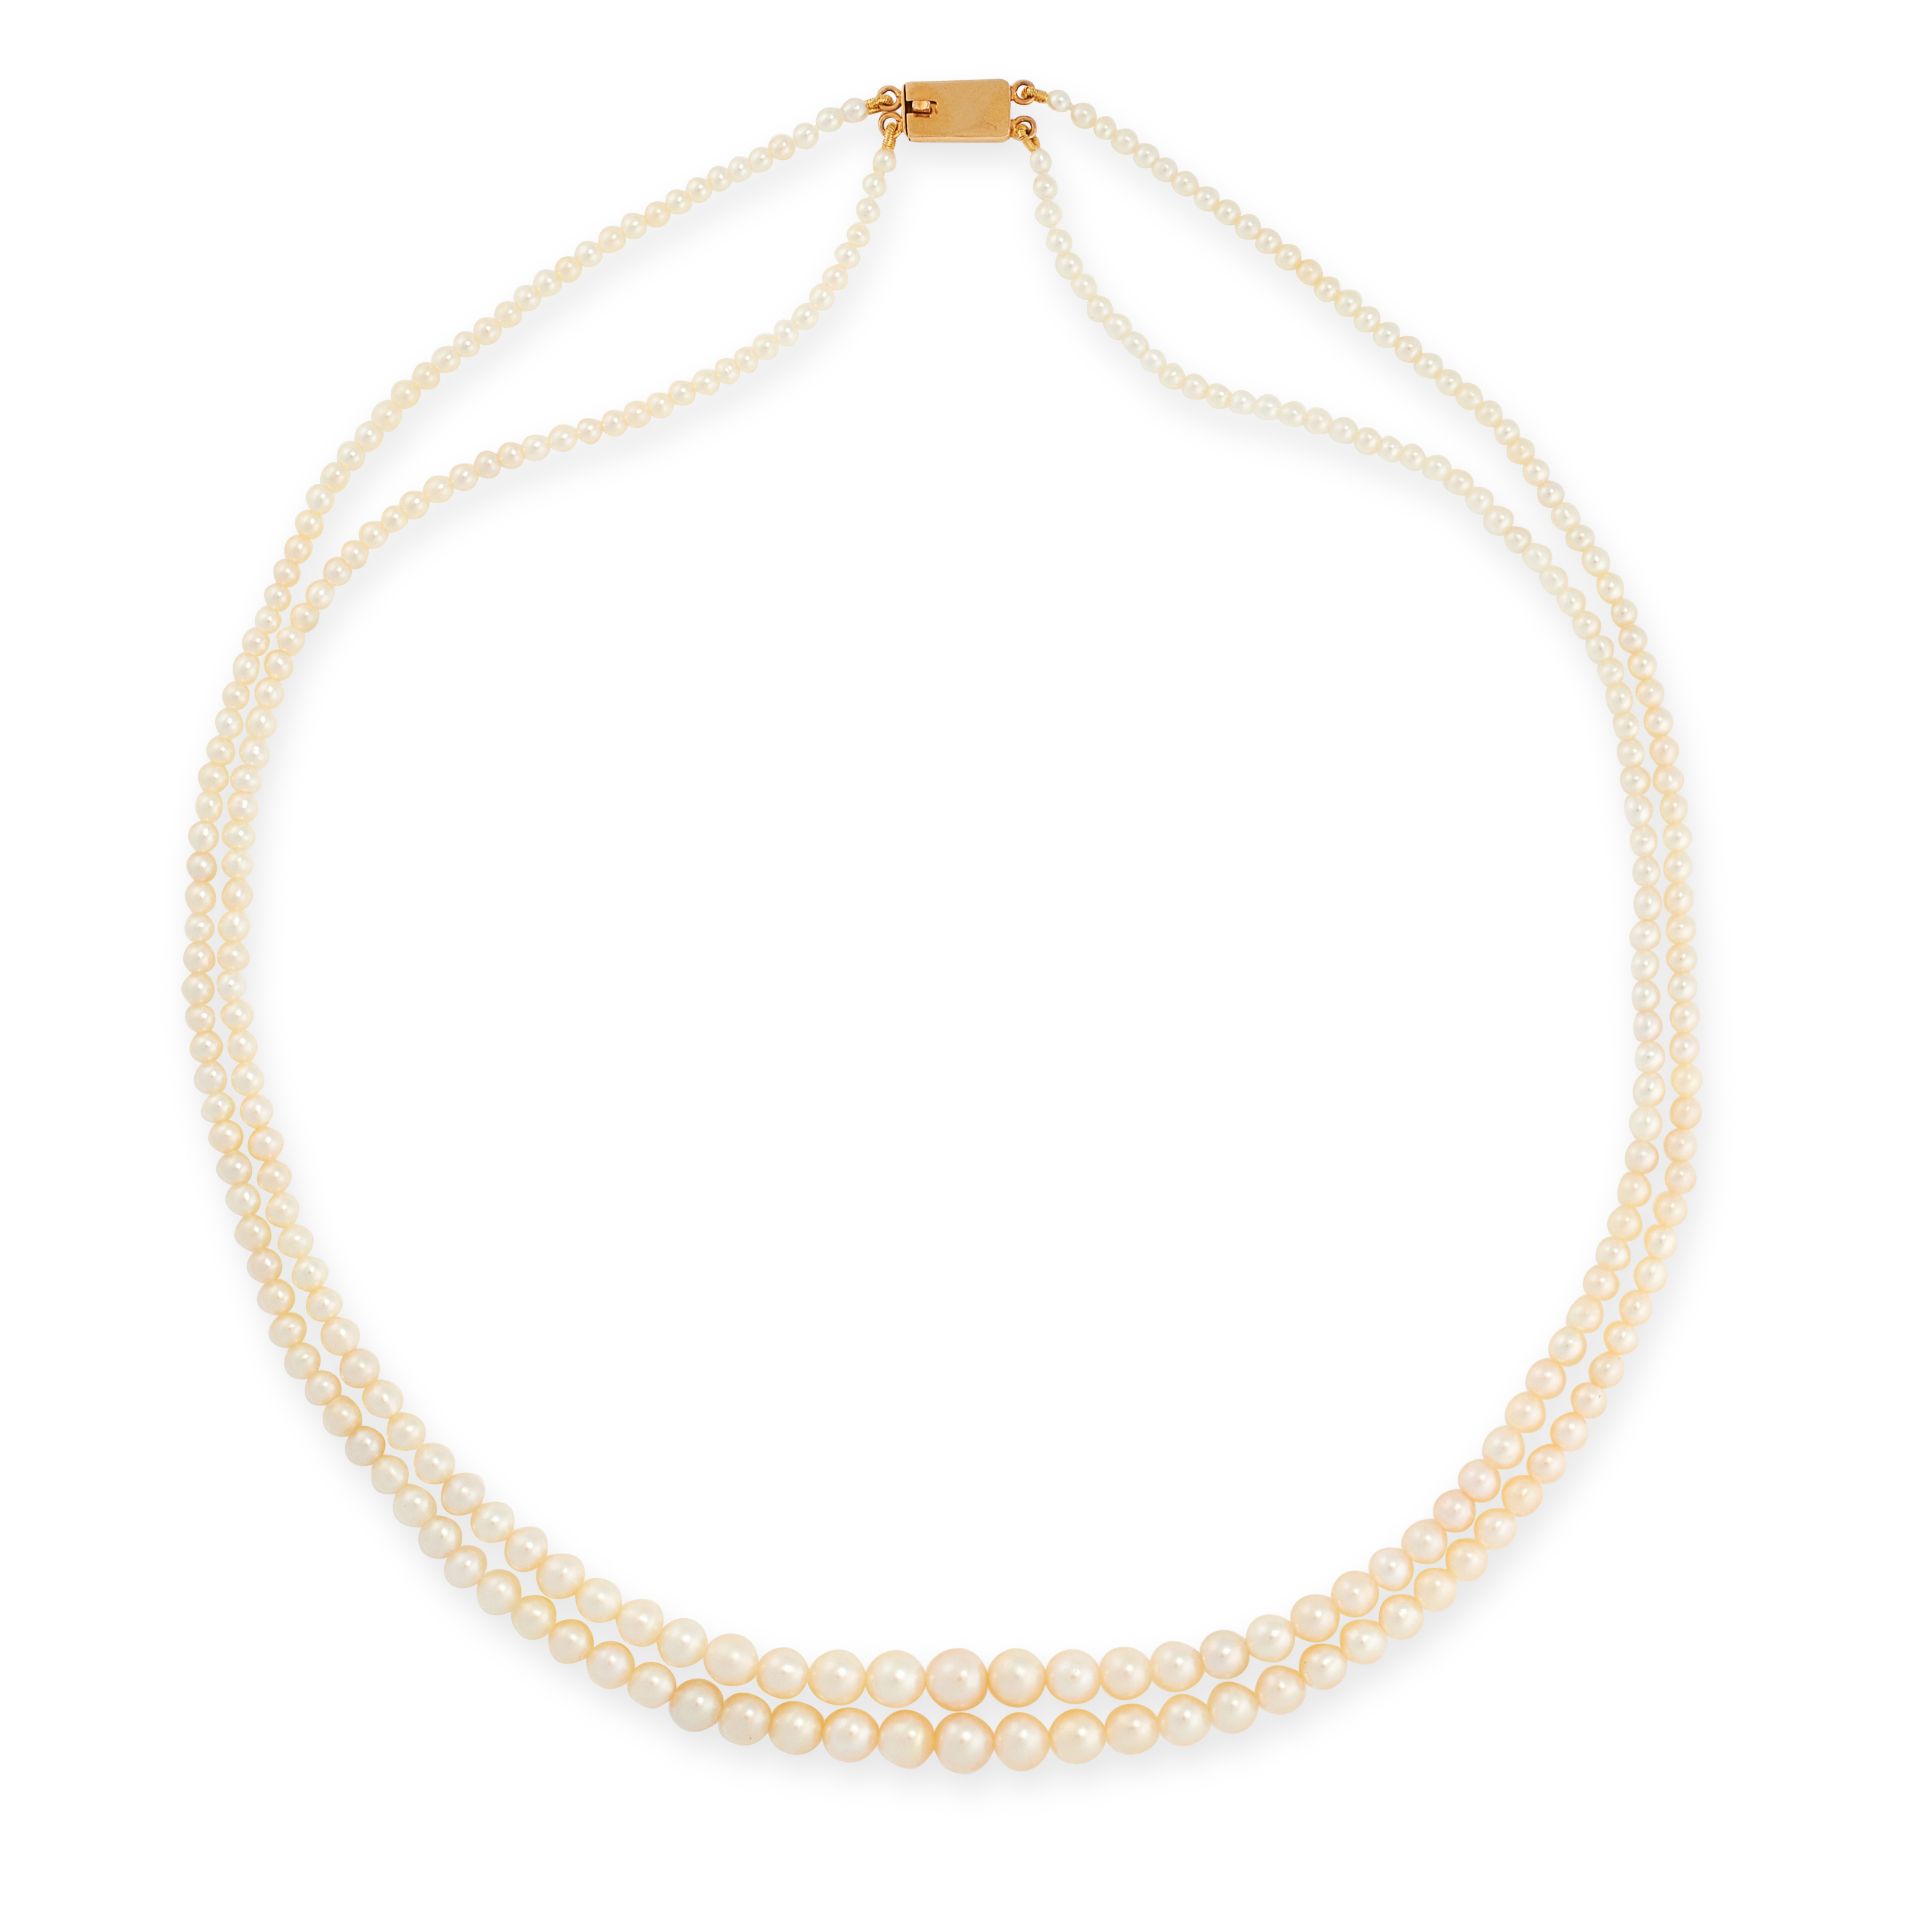 A NATURAL PEARL NECKLACE in 18ct yellow gold, comprising two rows of graduated pearls ranging 5.